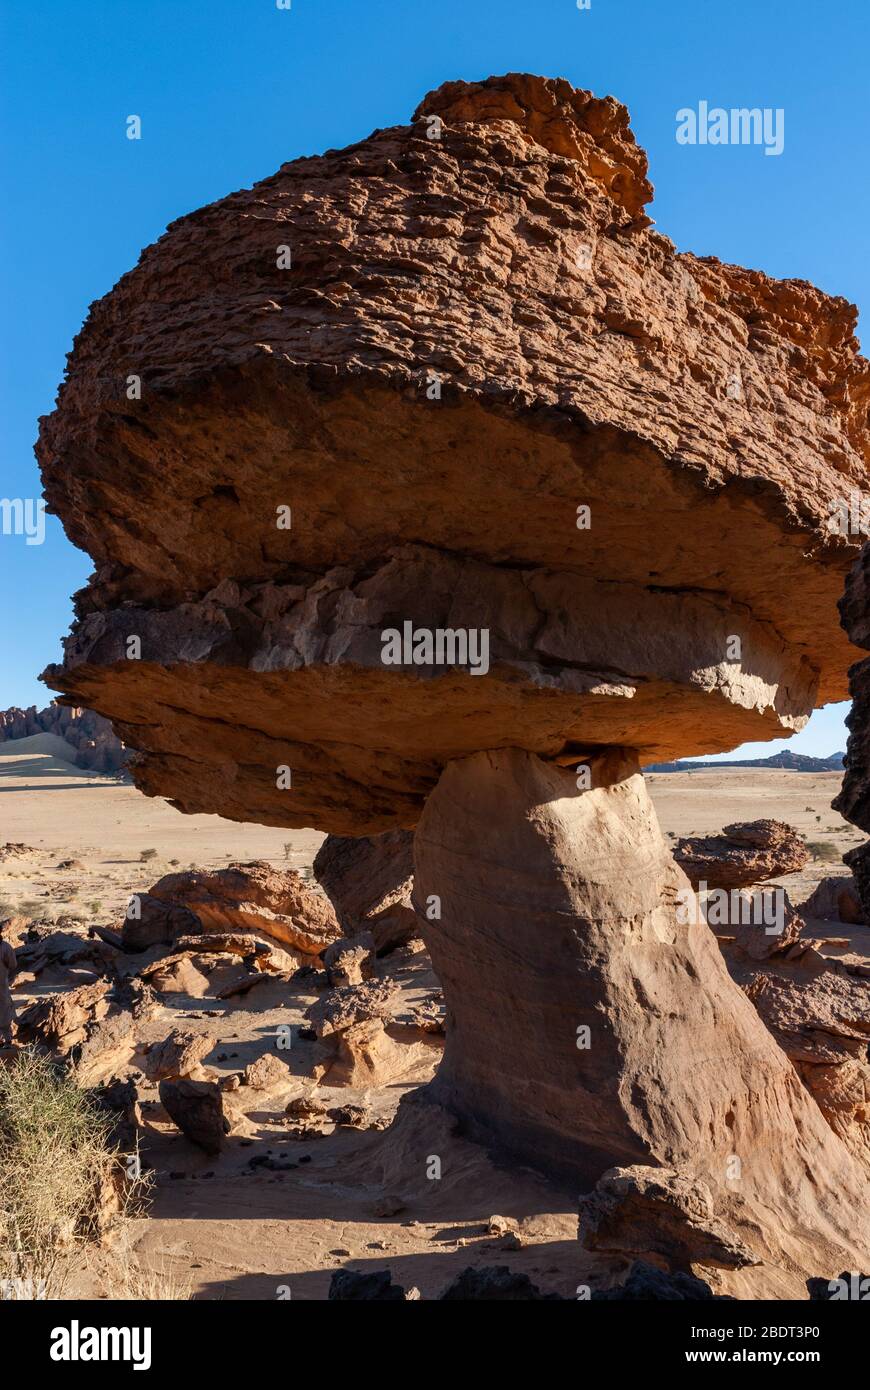 Sandstone towers in form of mushroom in the Ennedi desert of Chad, Africa Stock Photo